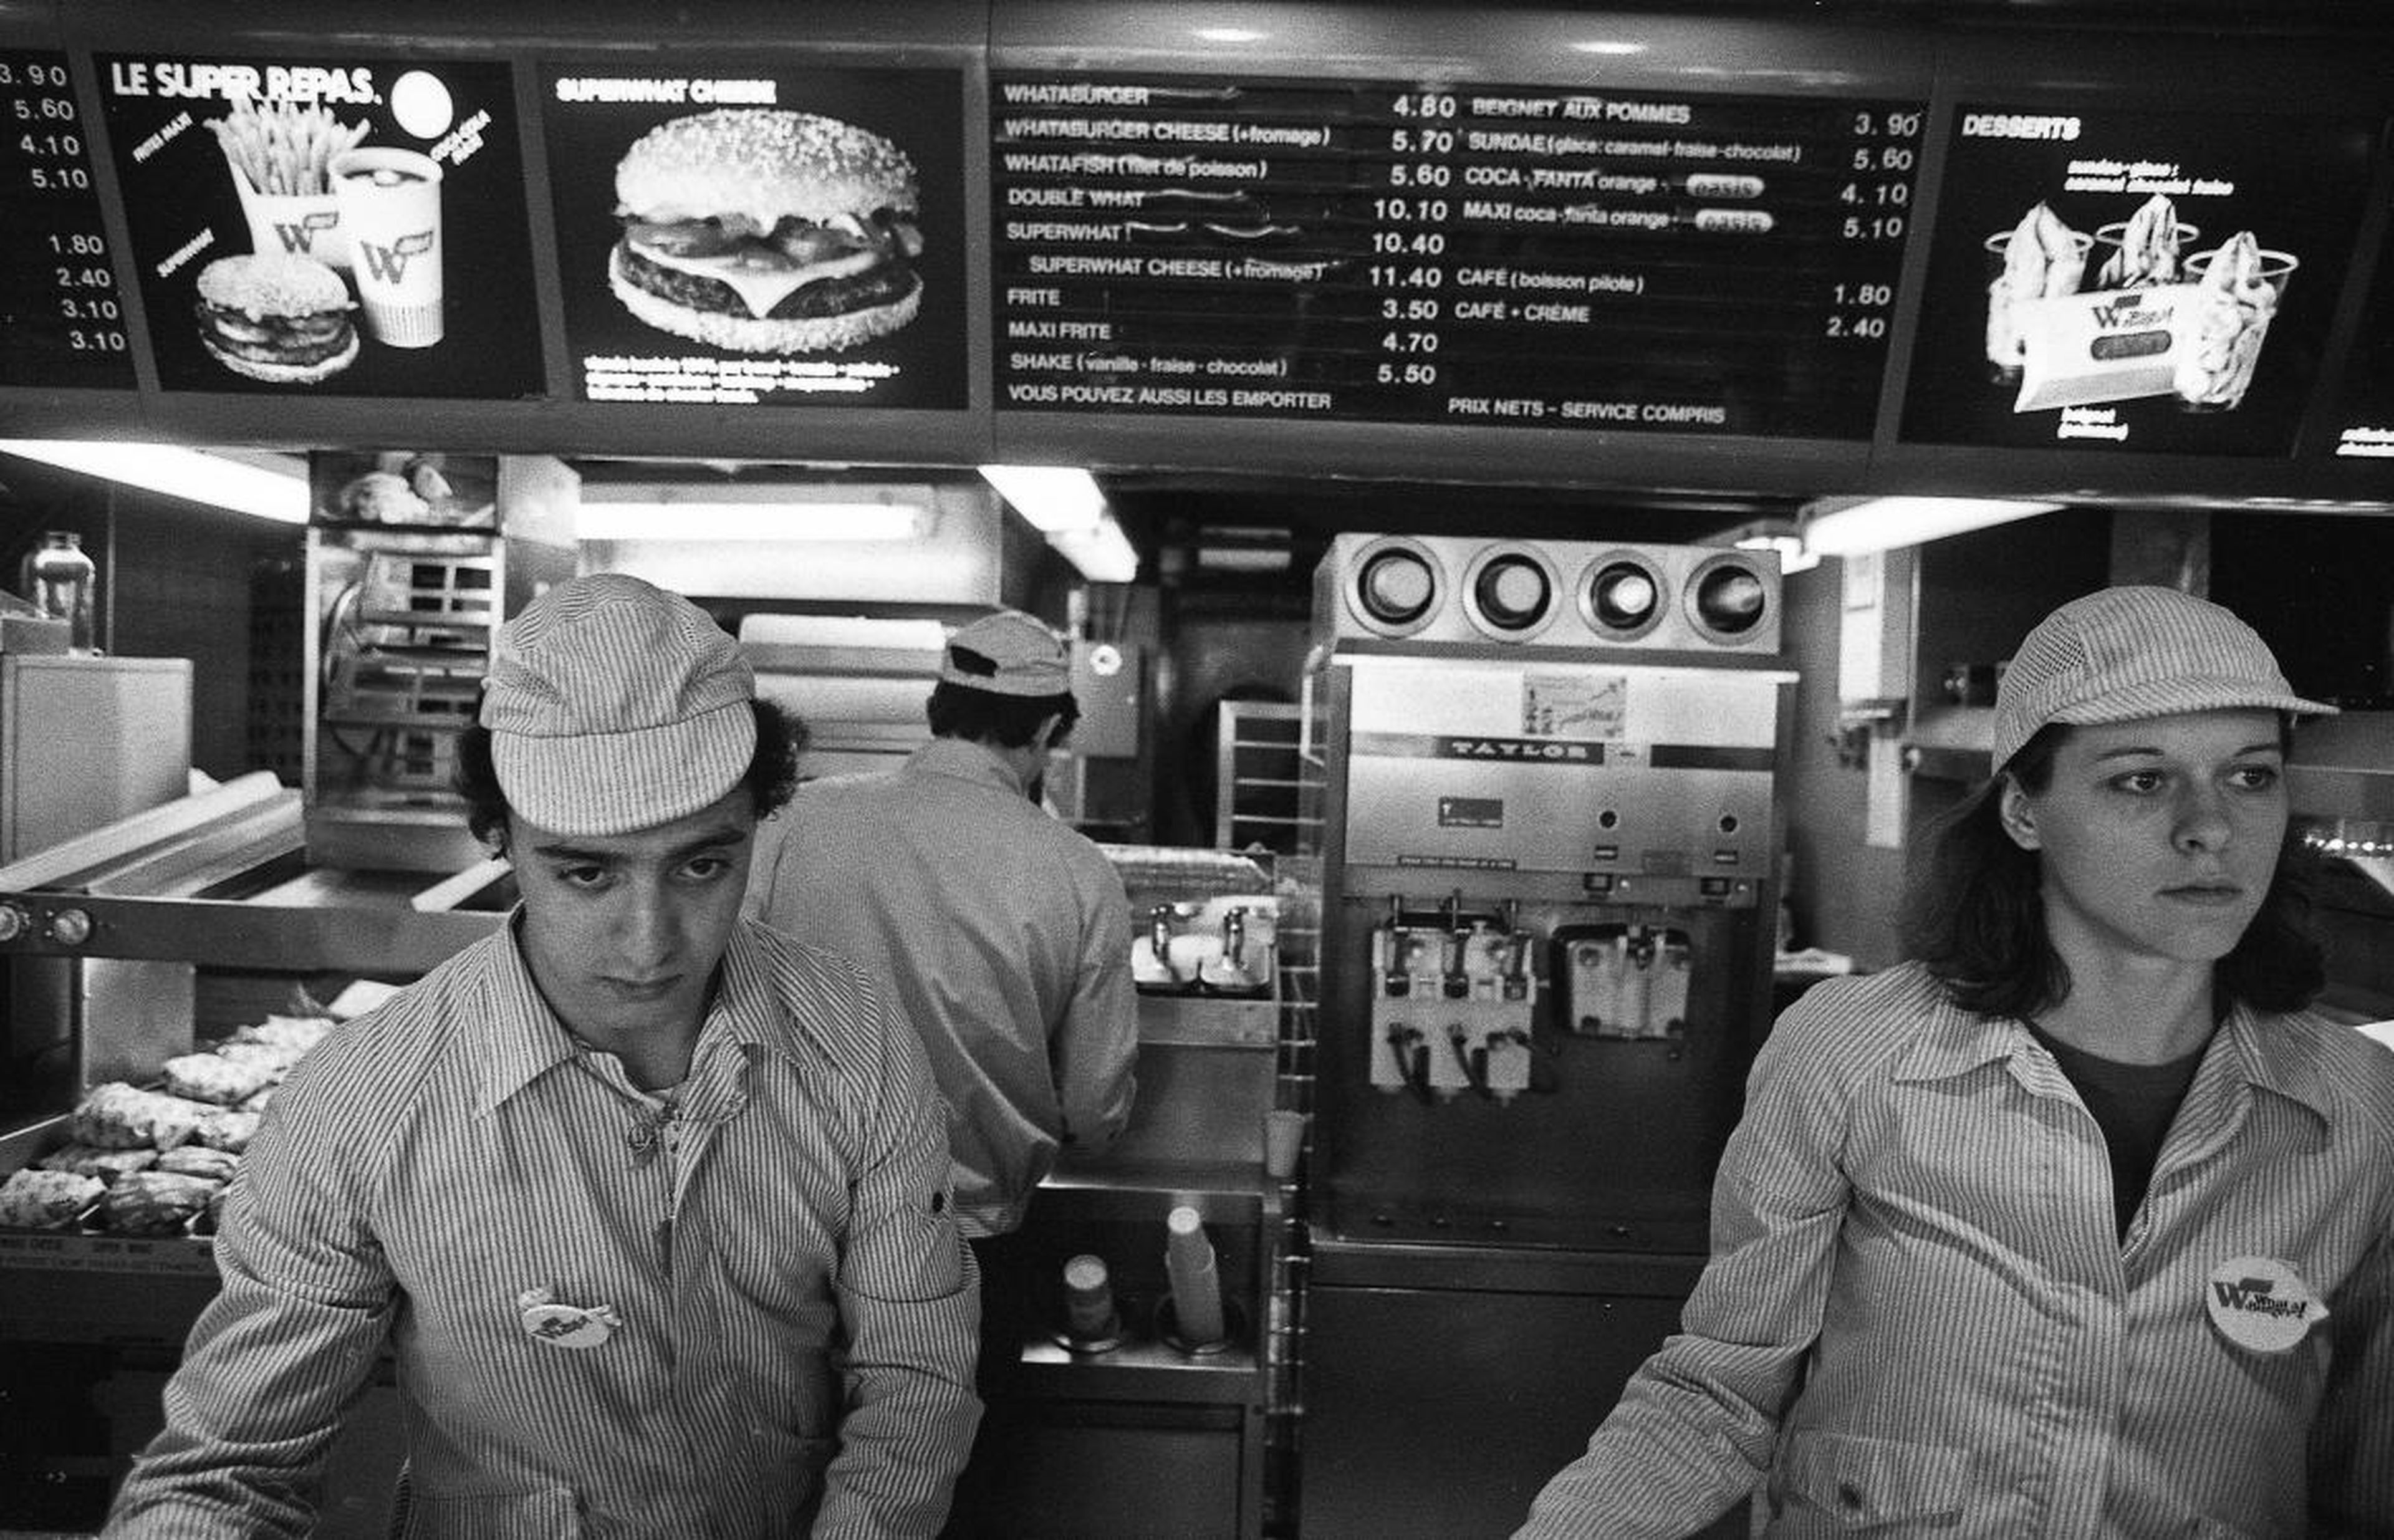 This photo was taken in 1982, two years after the first Burger King opened in France. Although the stripes look drab in this black-and-white photo, they were actually a bright, eye-catching red. Until recently, Burger King